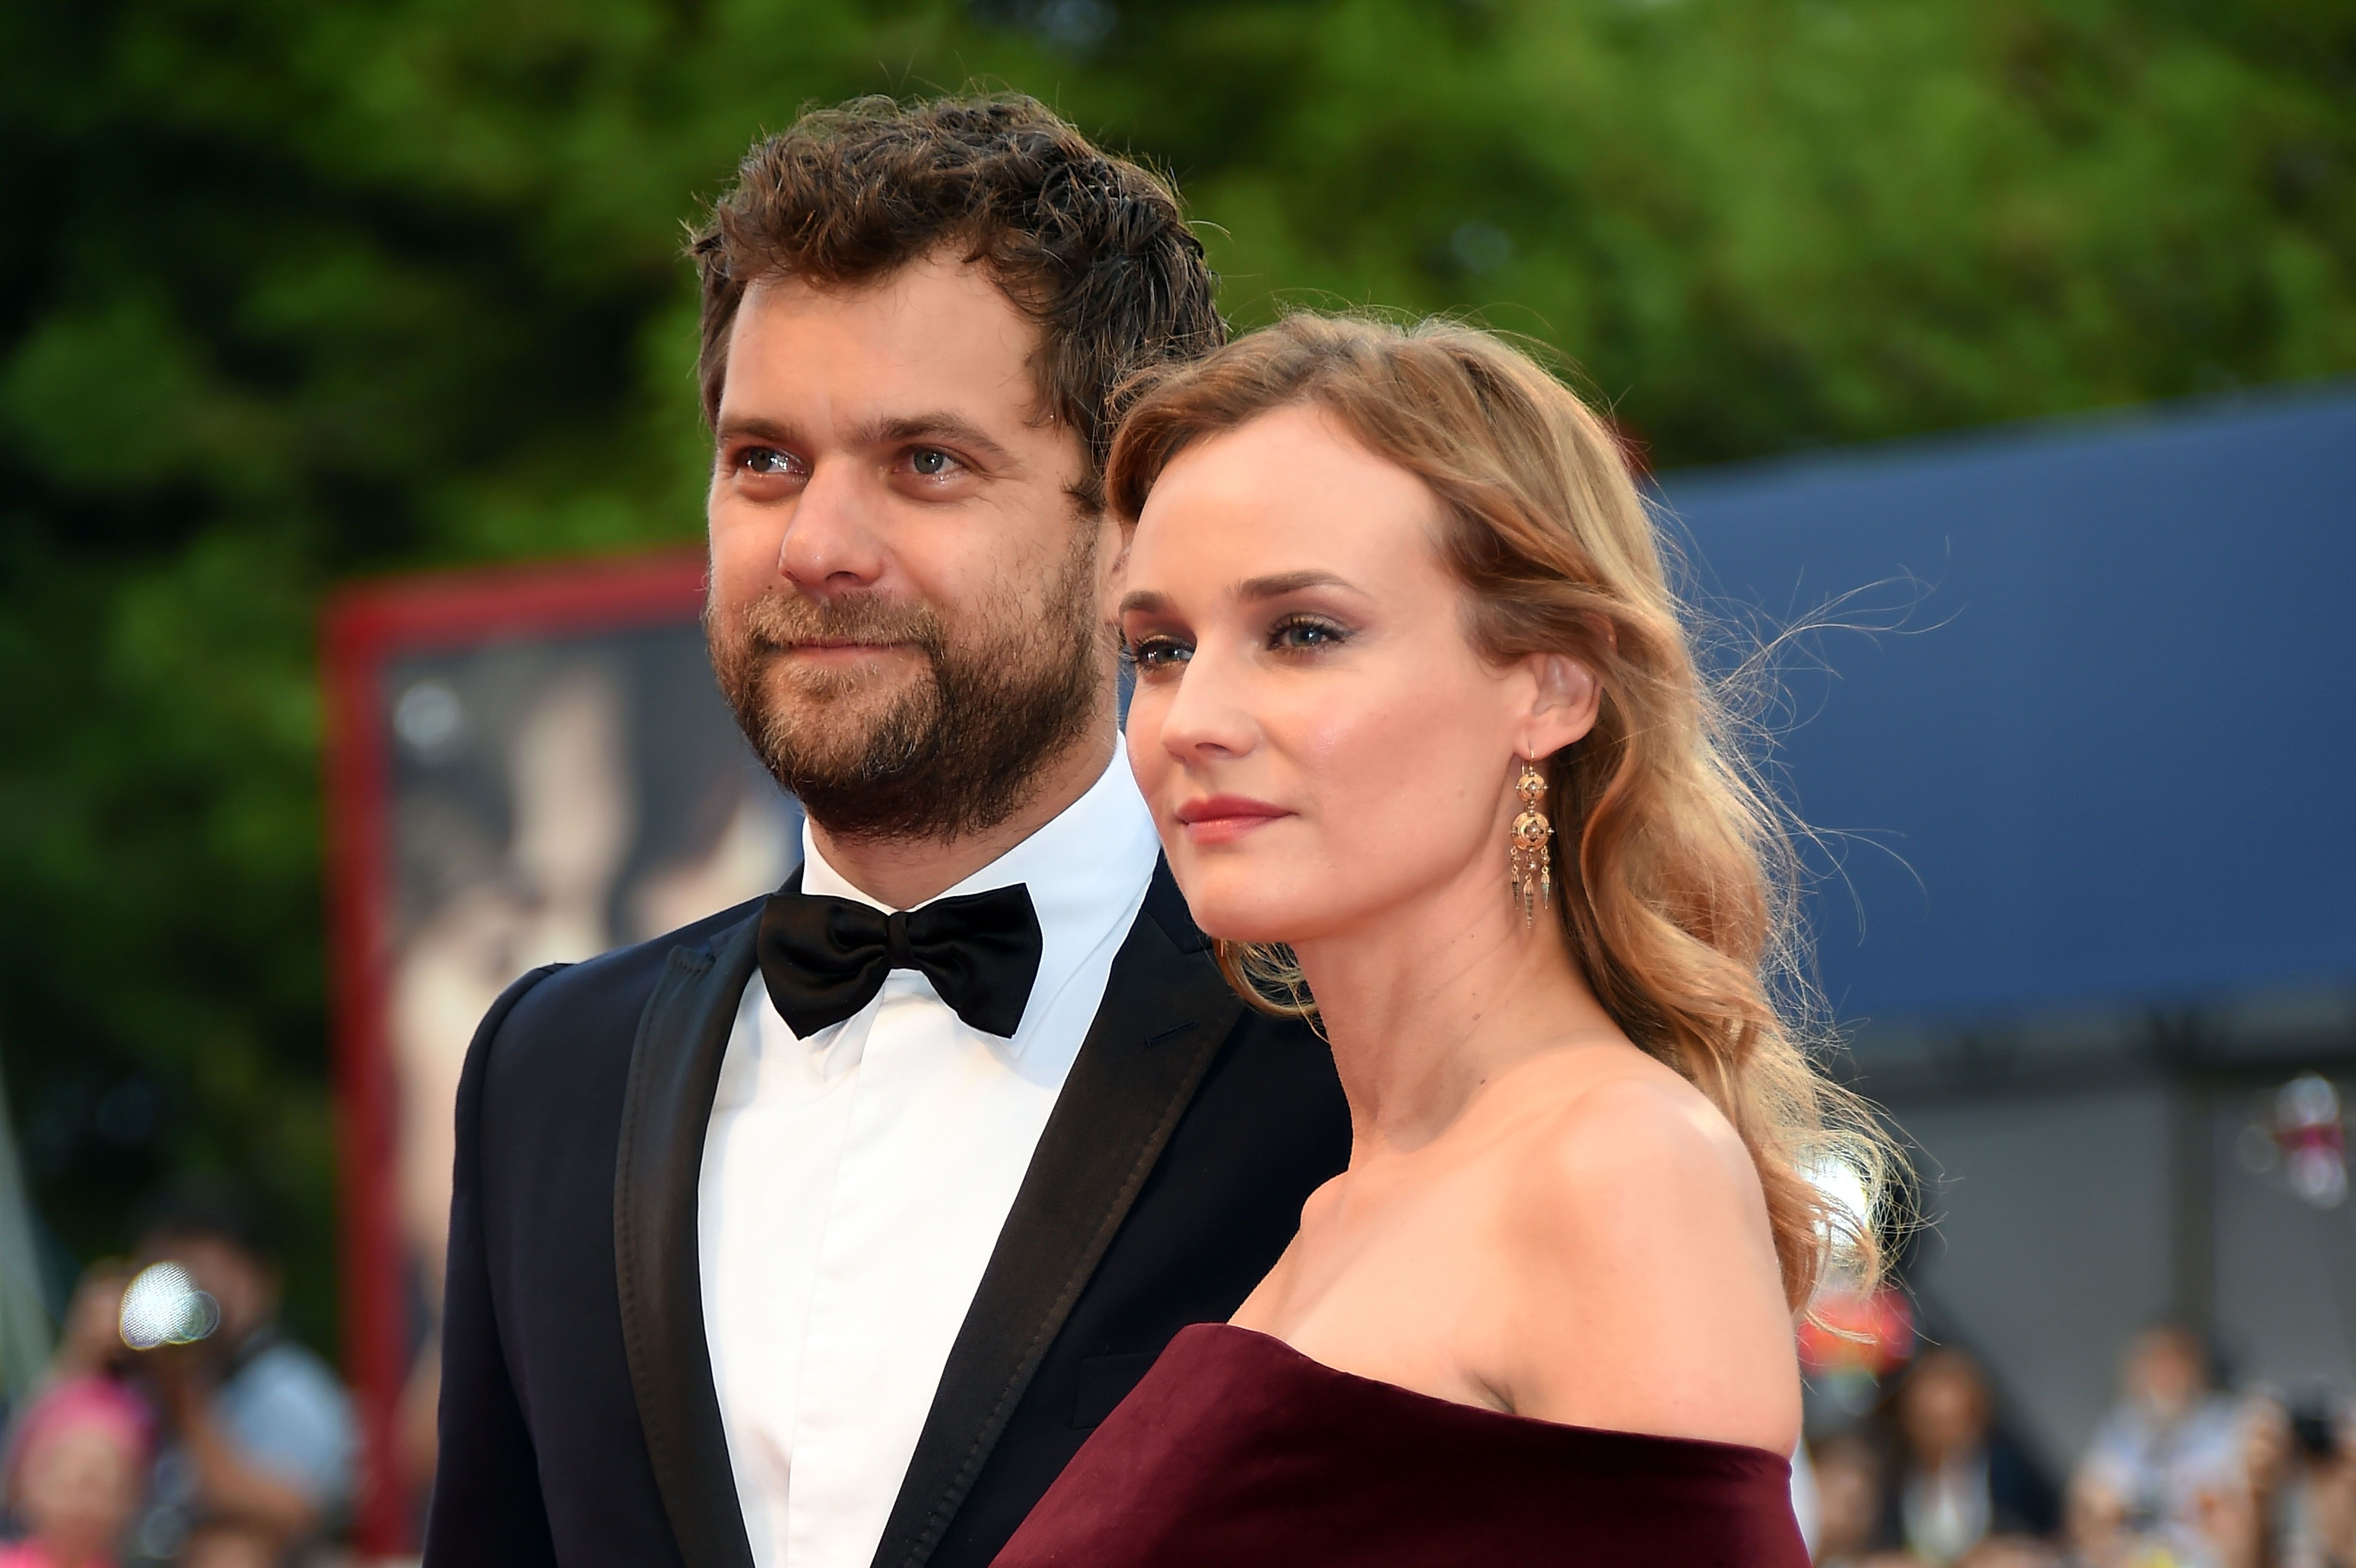 Diane Kruger reveals she fell into 'such a dark place' after her separation  from Joshua Jackson